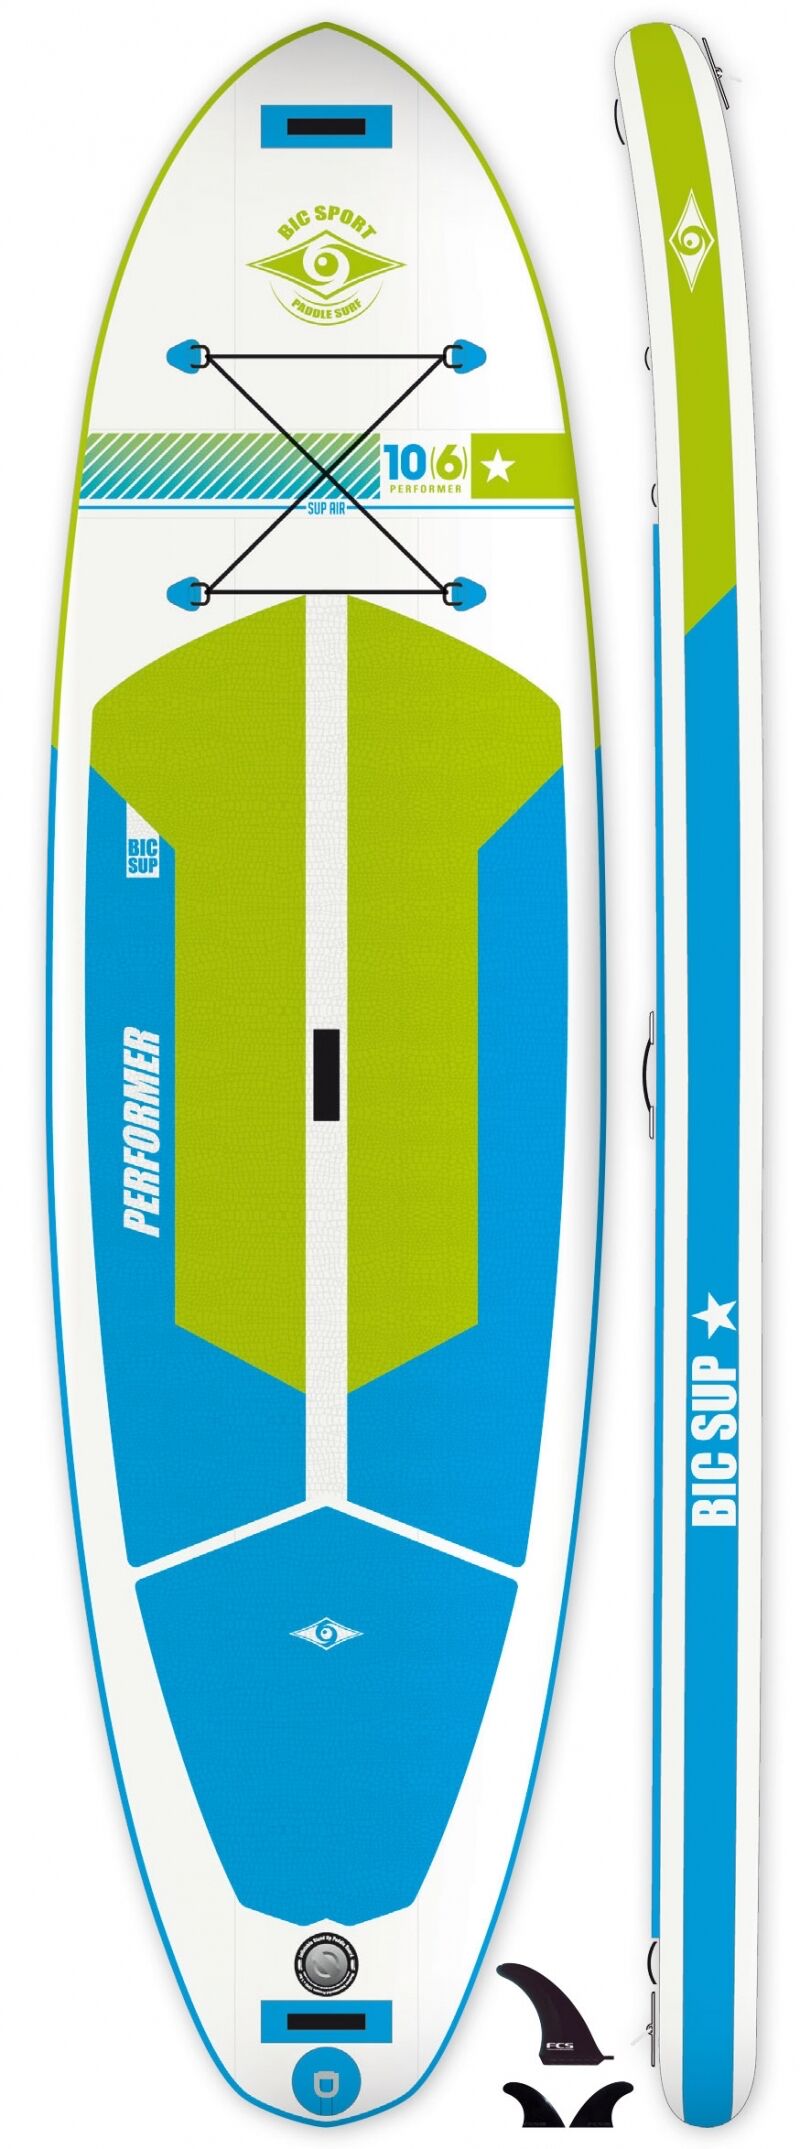 Tahe Outdoor - 10'6" Performer Air - Inflatable paddle board